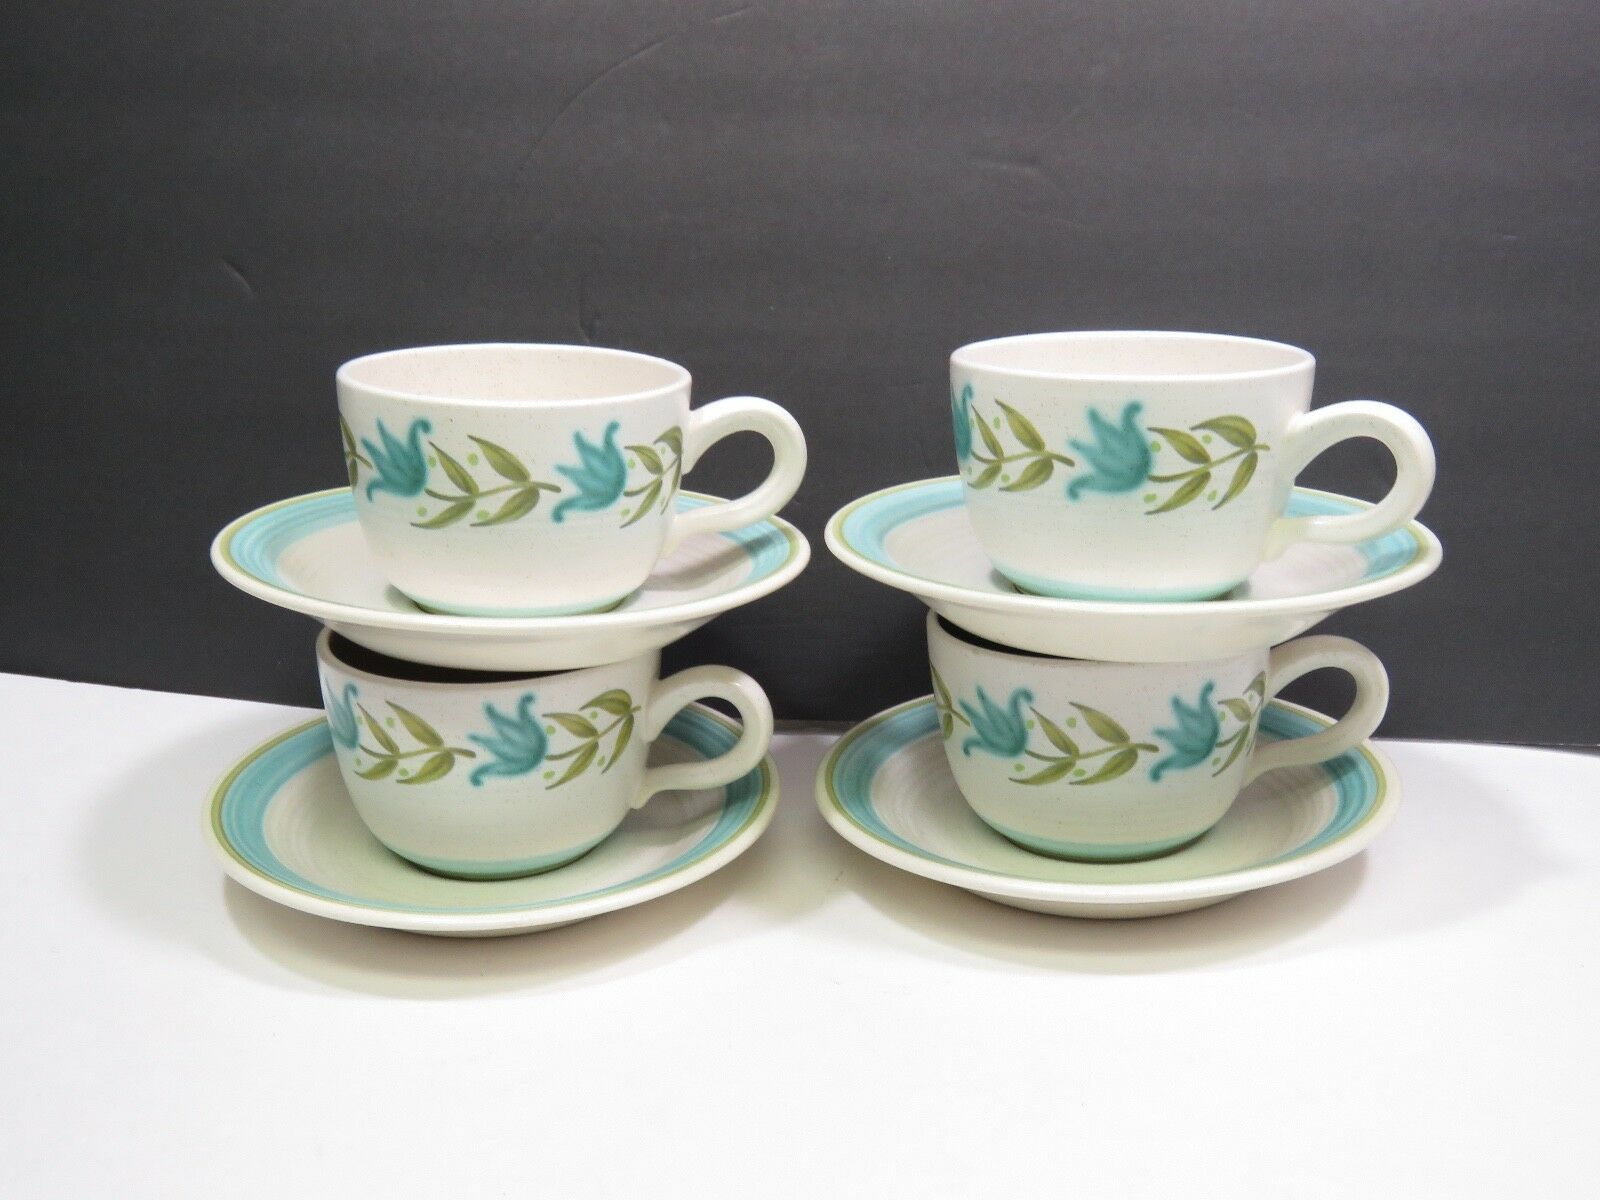 4 Franciscan Tulip Time Cups and Saucers - $19.80